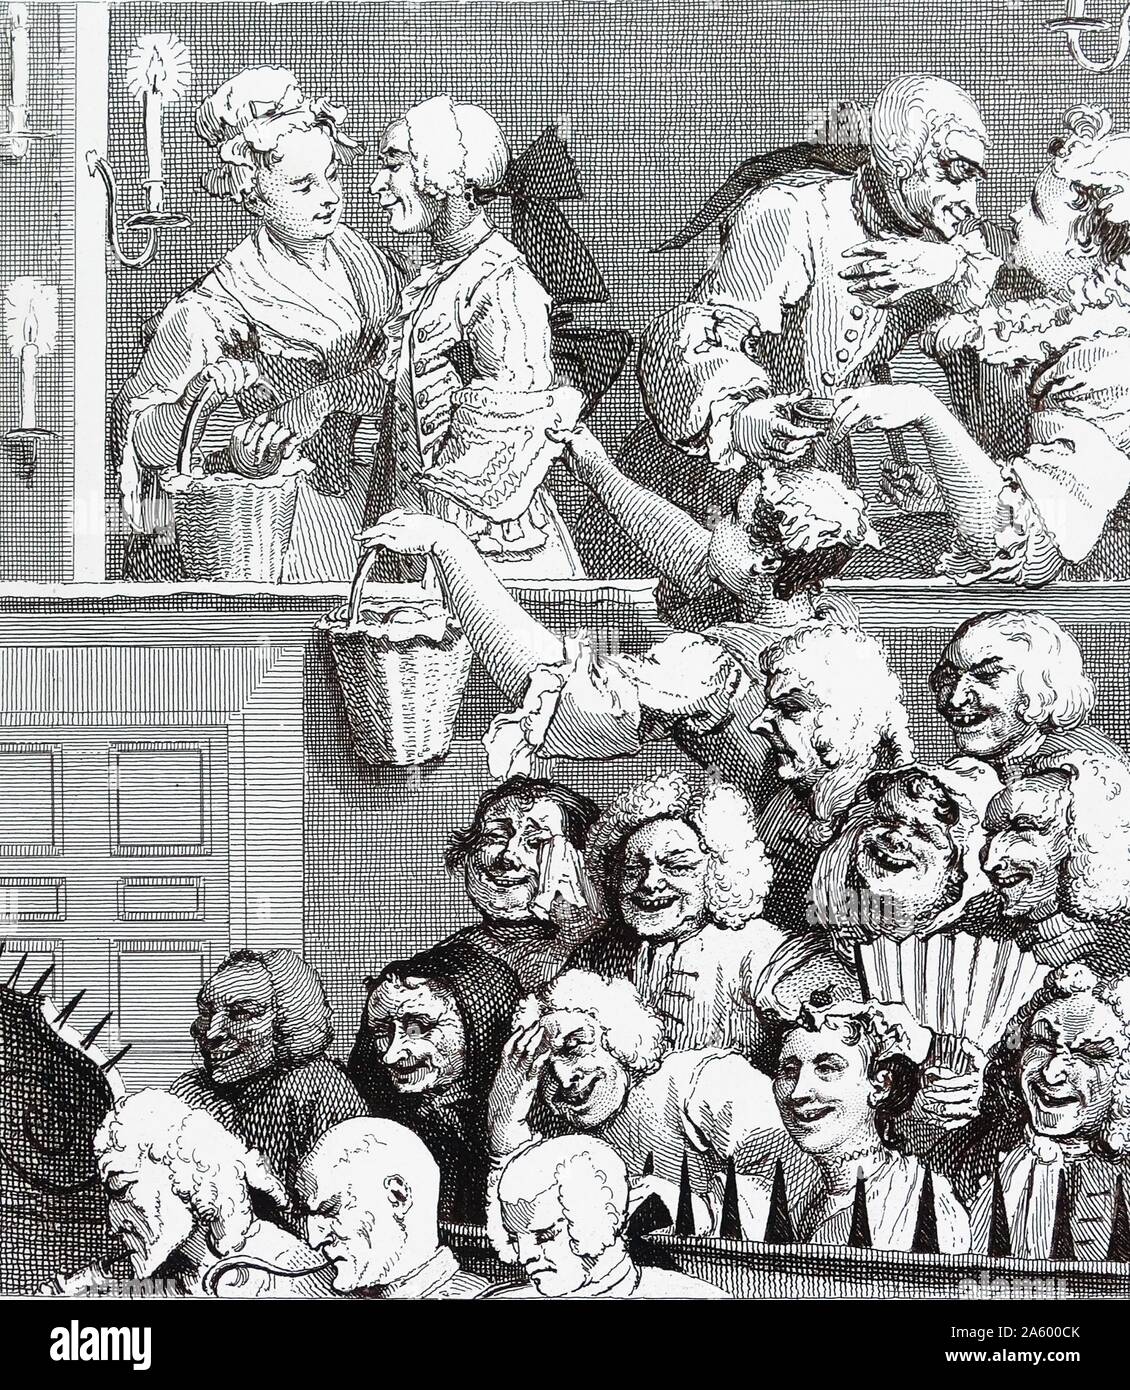 The Laughing Audience, Bill of Sale 1733; by William Hogarth (1697 – 1764). English painter, printmaker, pictorial satirist. The Laughing Audience is divided into three sections which depict three classes of people Stock Photo